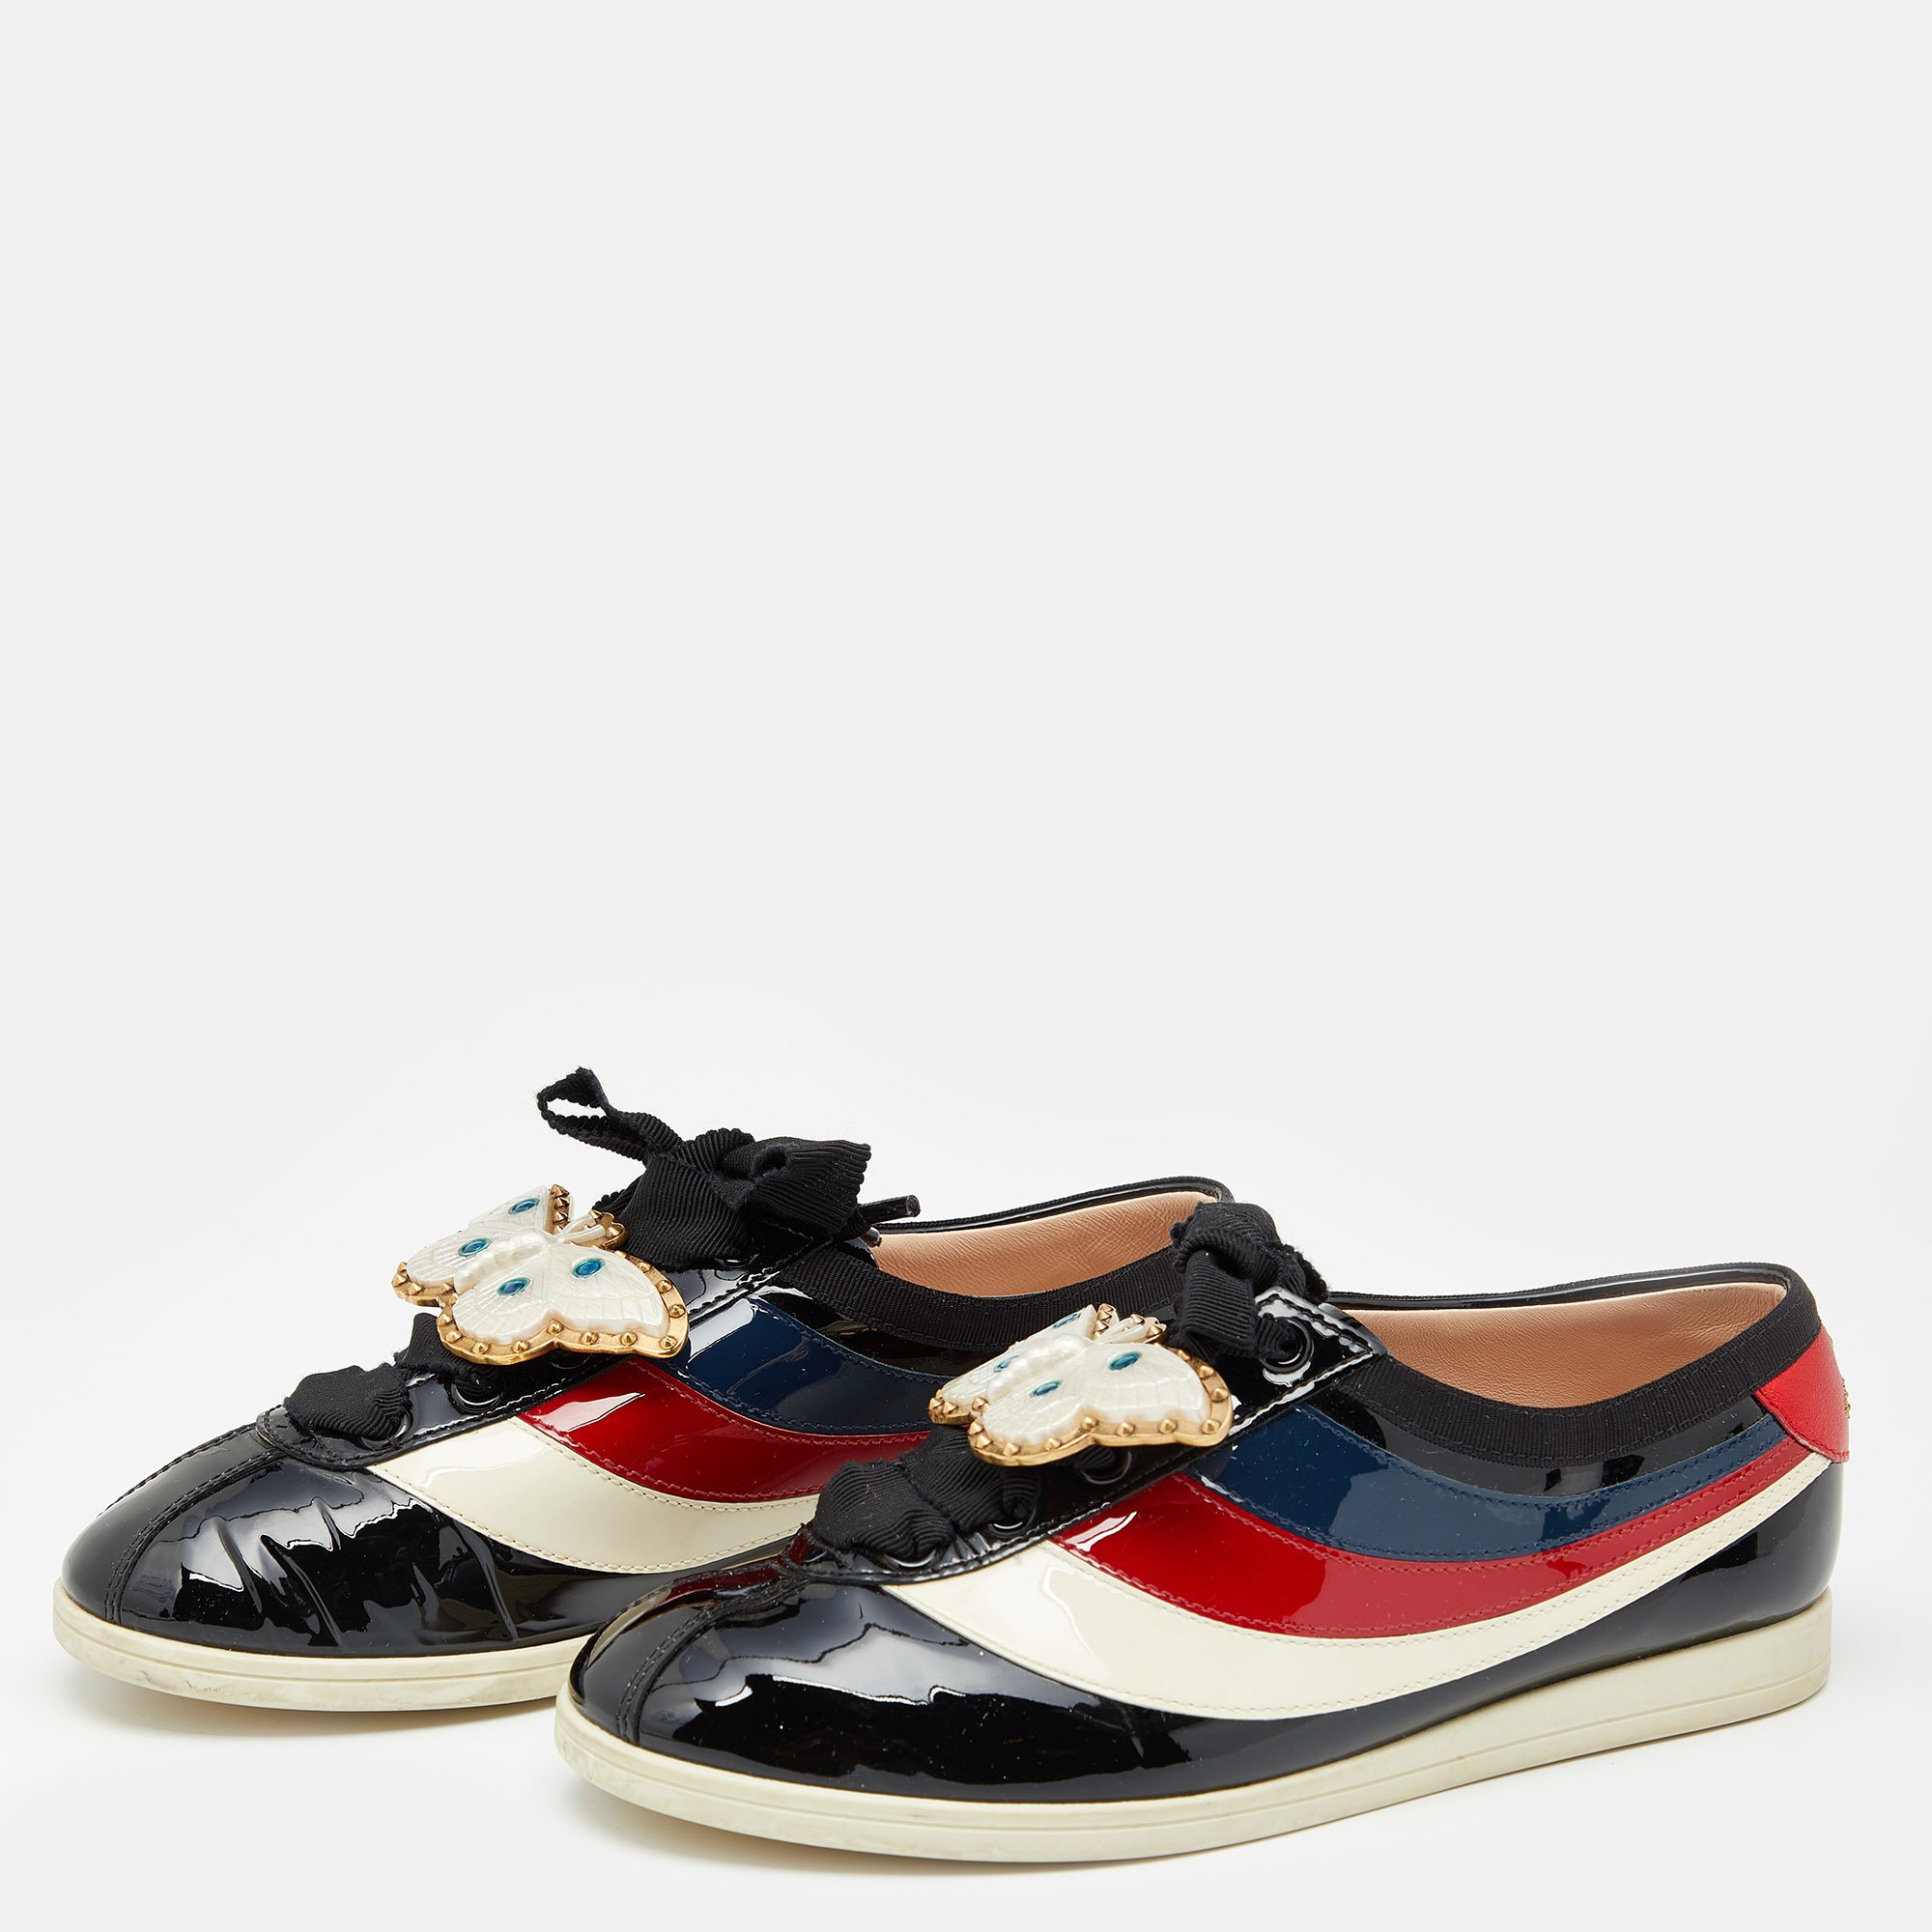 

Gucci Multicolor Patent Leather New Ace Falacer Butterfly Low Top Sneakers Size